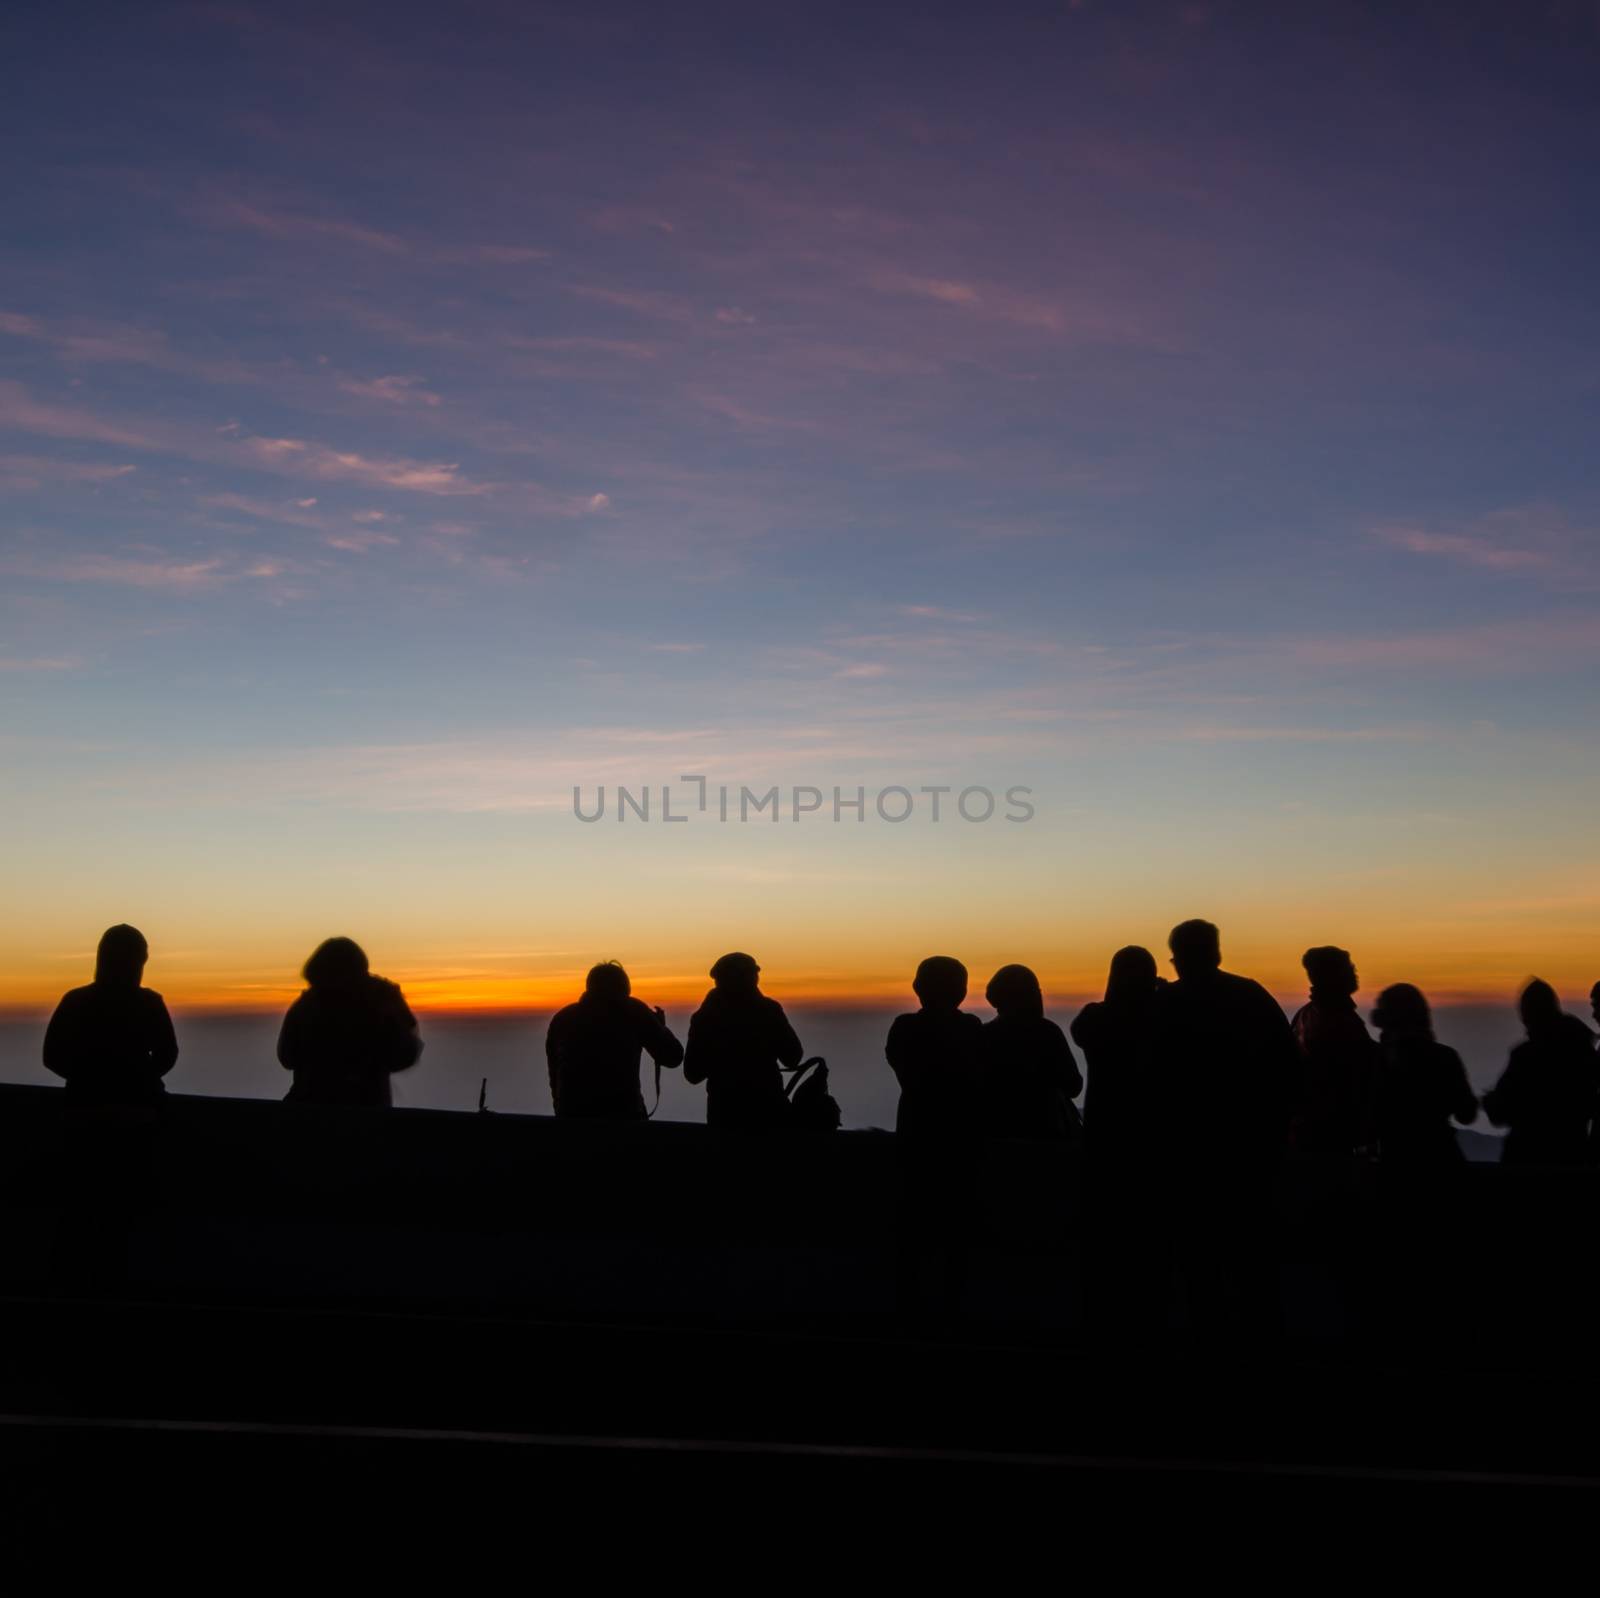 The people silhouette are waiting watch for the sun rise,in the  by photobyphotoboy